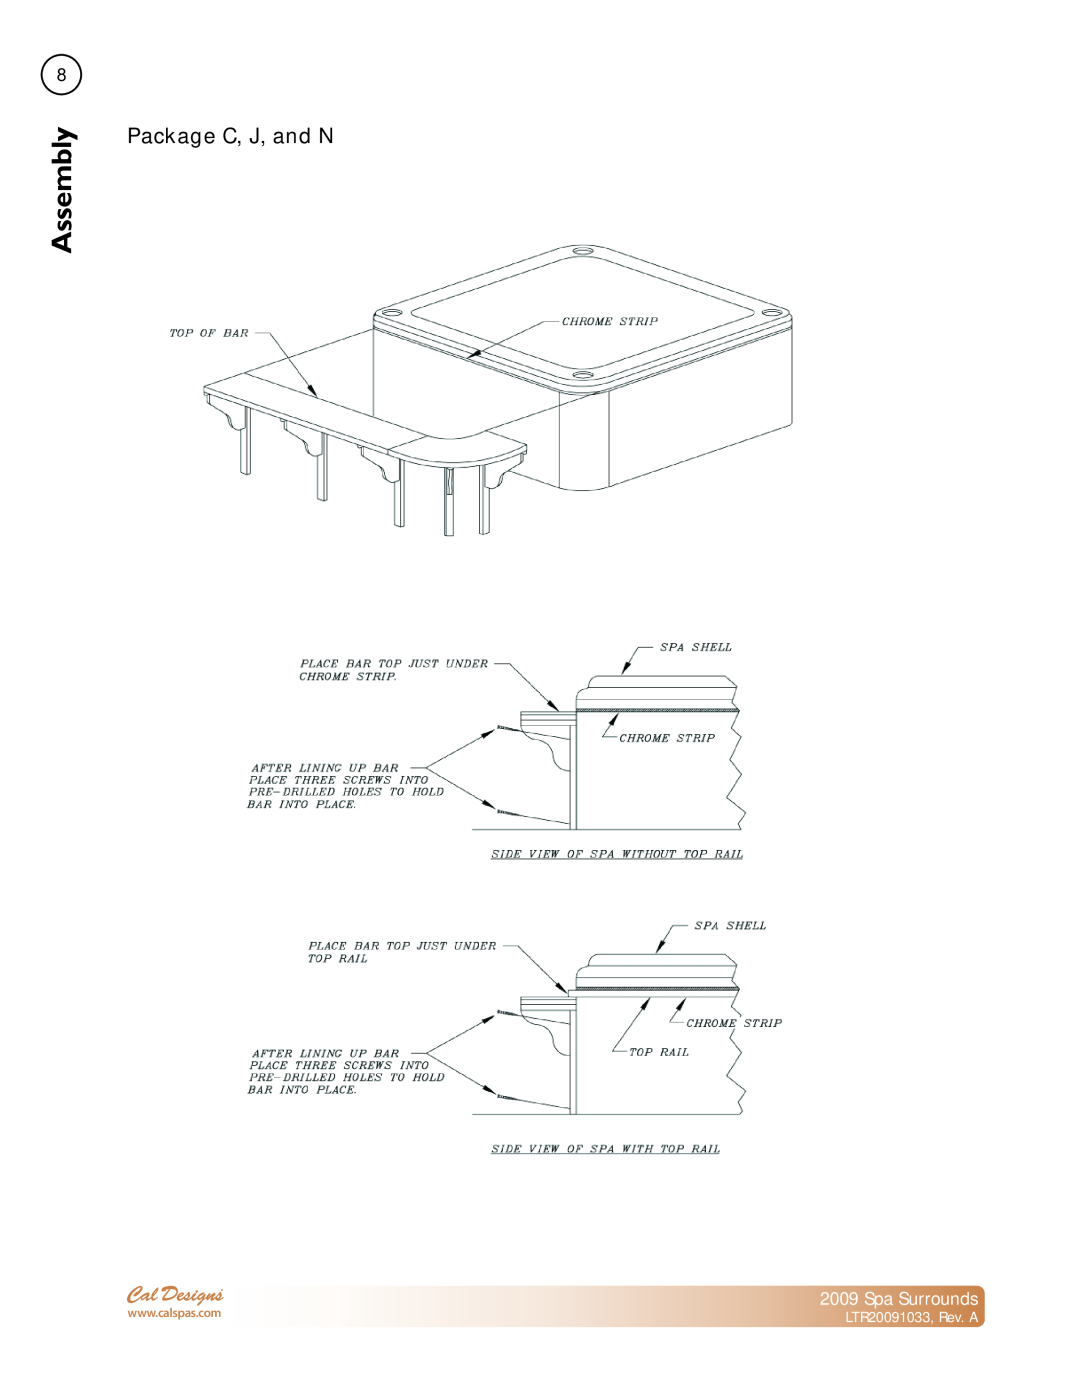 Cal Spas Spa Surrounds manual Package C, J, and N, LTR20091033, Rev. A, Assembly 